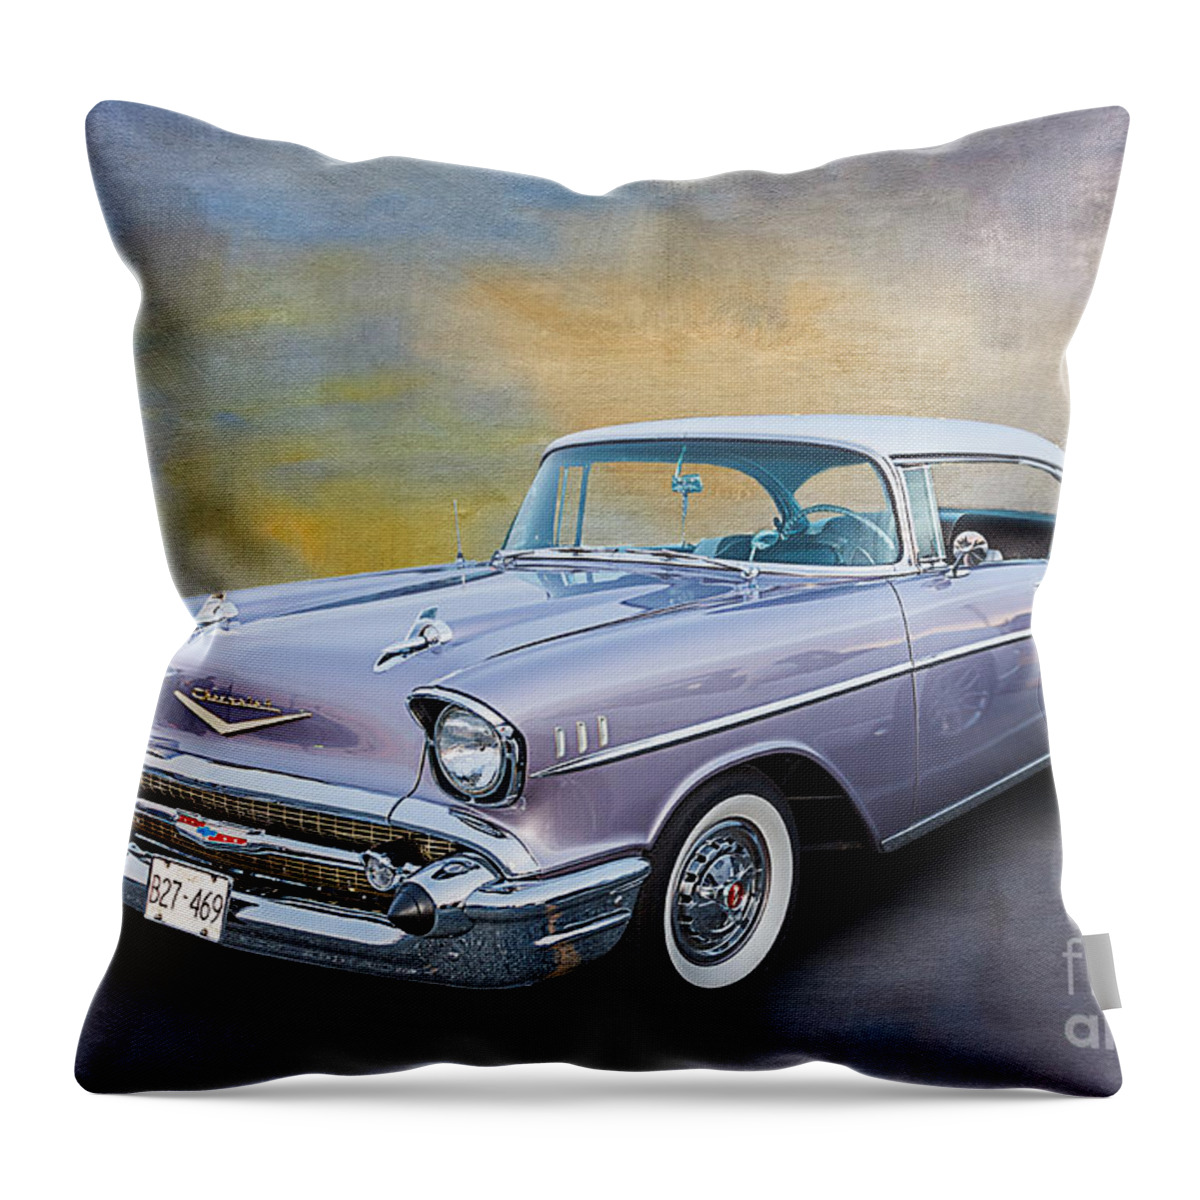 Auto Throw Pillow featuring the photograph 57 Chev classic Car by Jim Hatch